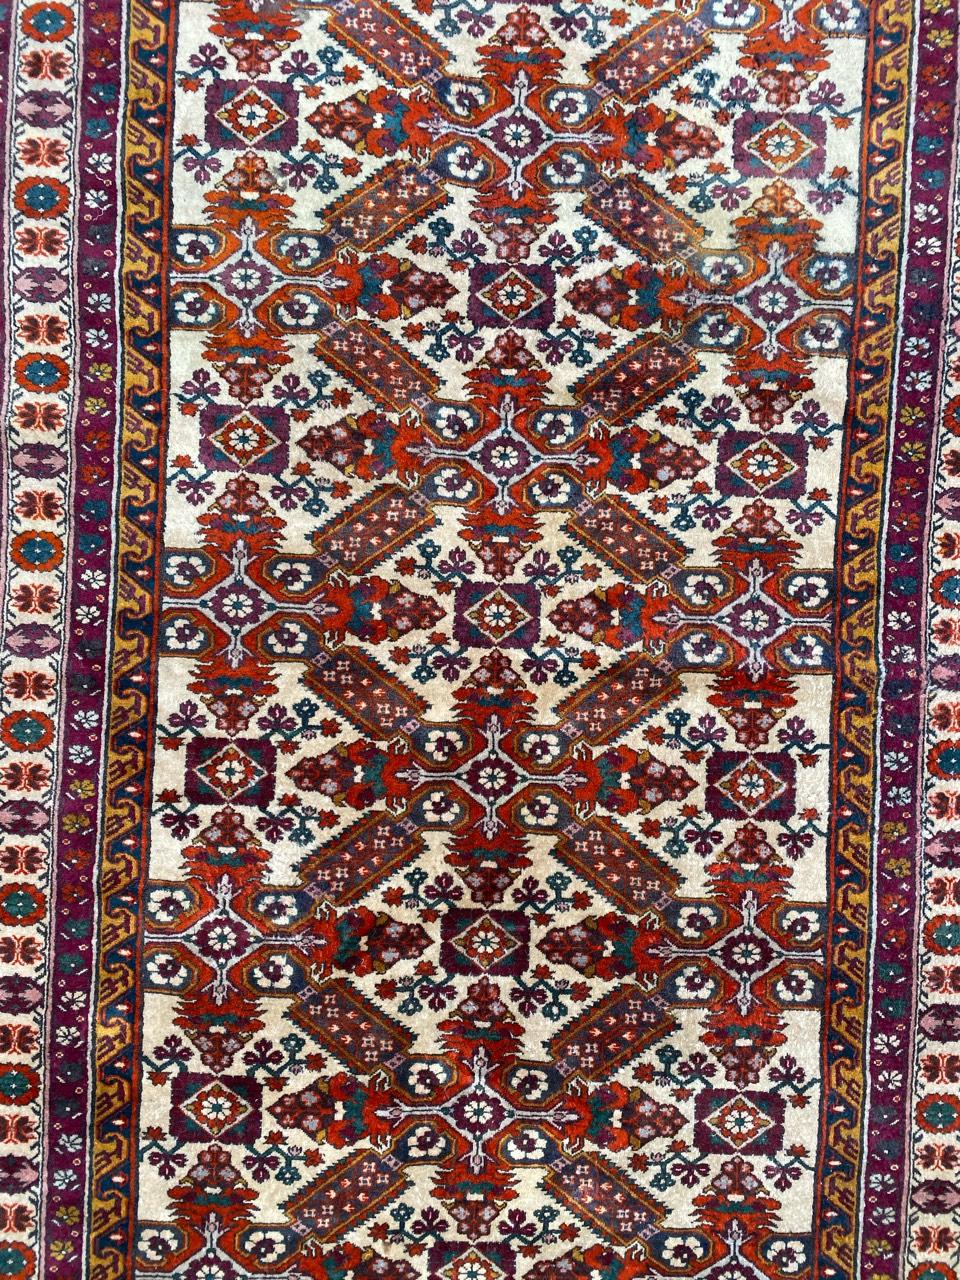 Nice 20th century Shirwan rug with geometrical Kouba design and nice colors with blue, green, orange and purple, entirely and finely hand knotted with wool velvet on cotton foundation.

✨✨✨
